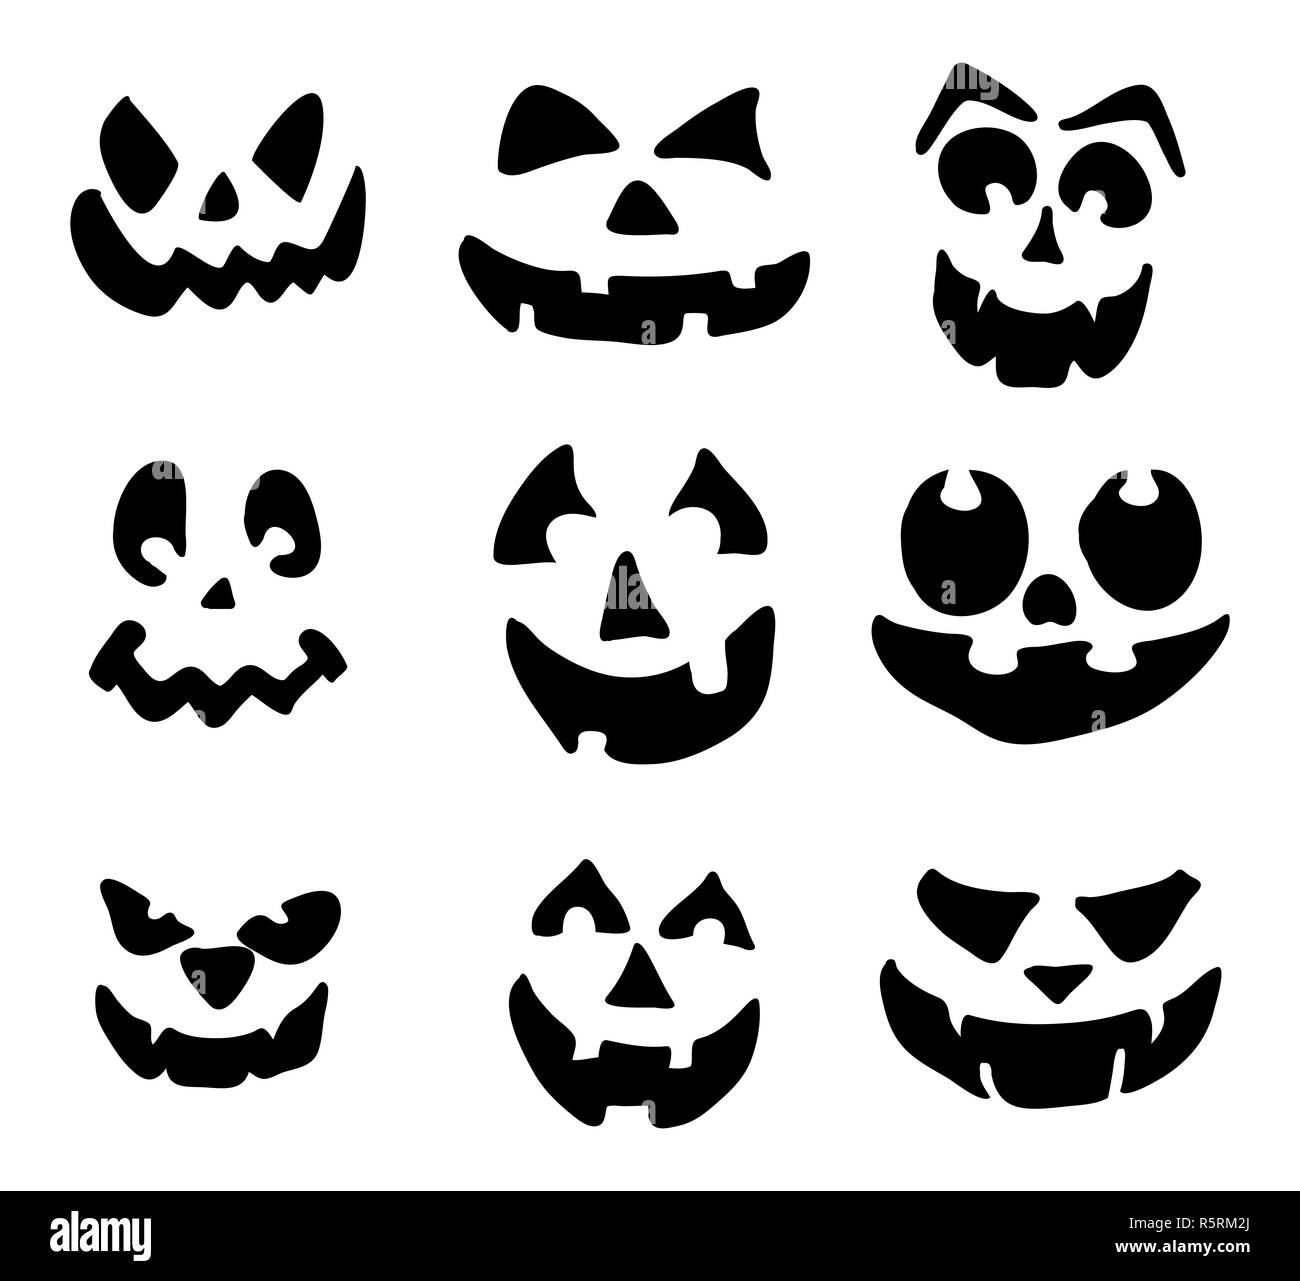 Scared face image Royalty Free Stock SVG Vector